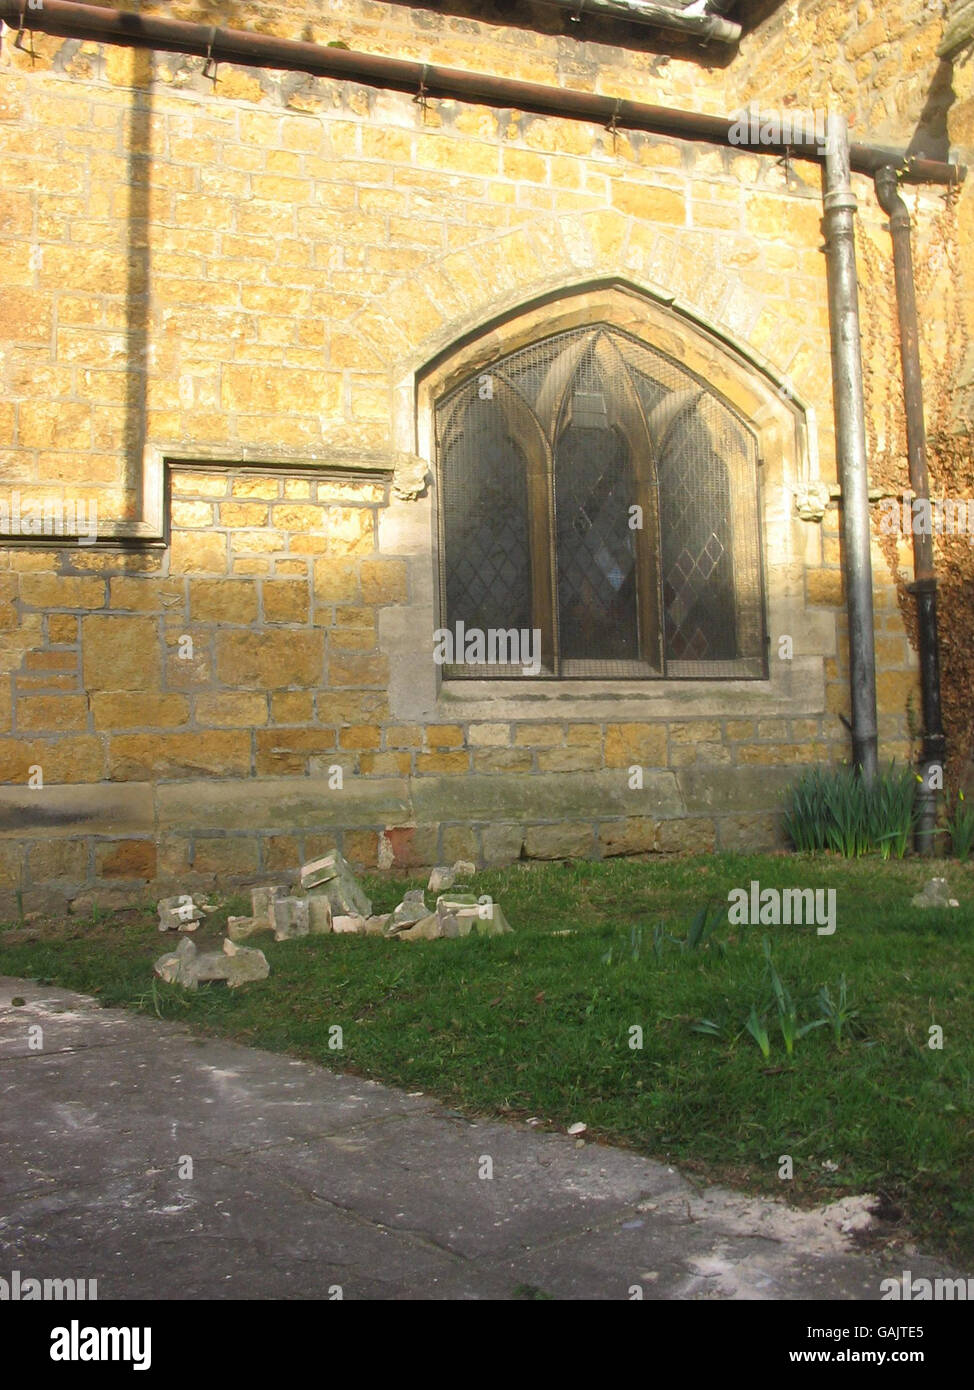 Brickwork apparently fallen from The Parish Church of St Thomas, in Market Rasen after earthquake with a magnitude of 5.2 (ML) on the Richter scale near Market Rasen, Lincolnshire at 00:56 GMT. Stock Photo